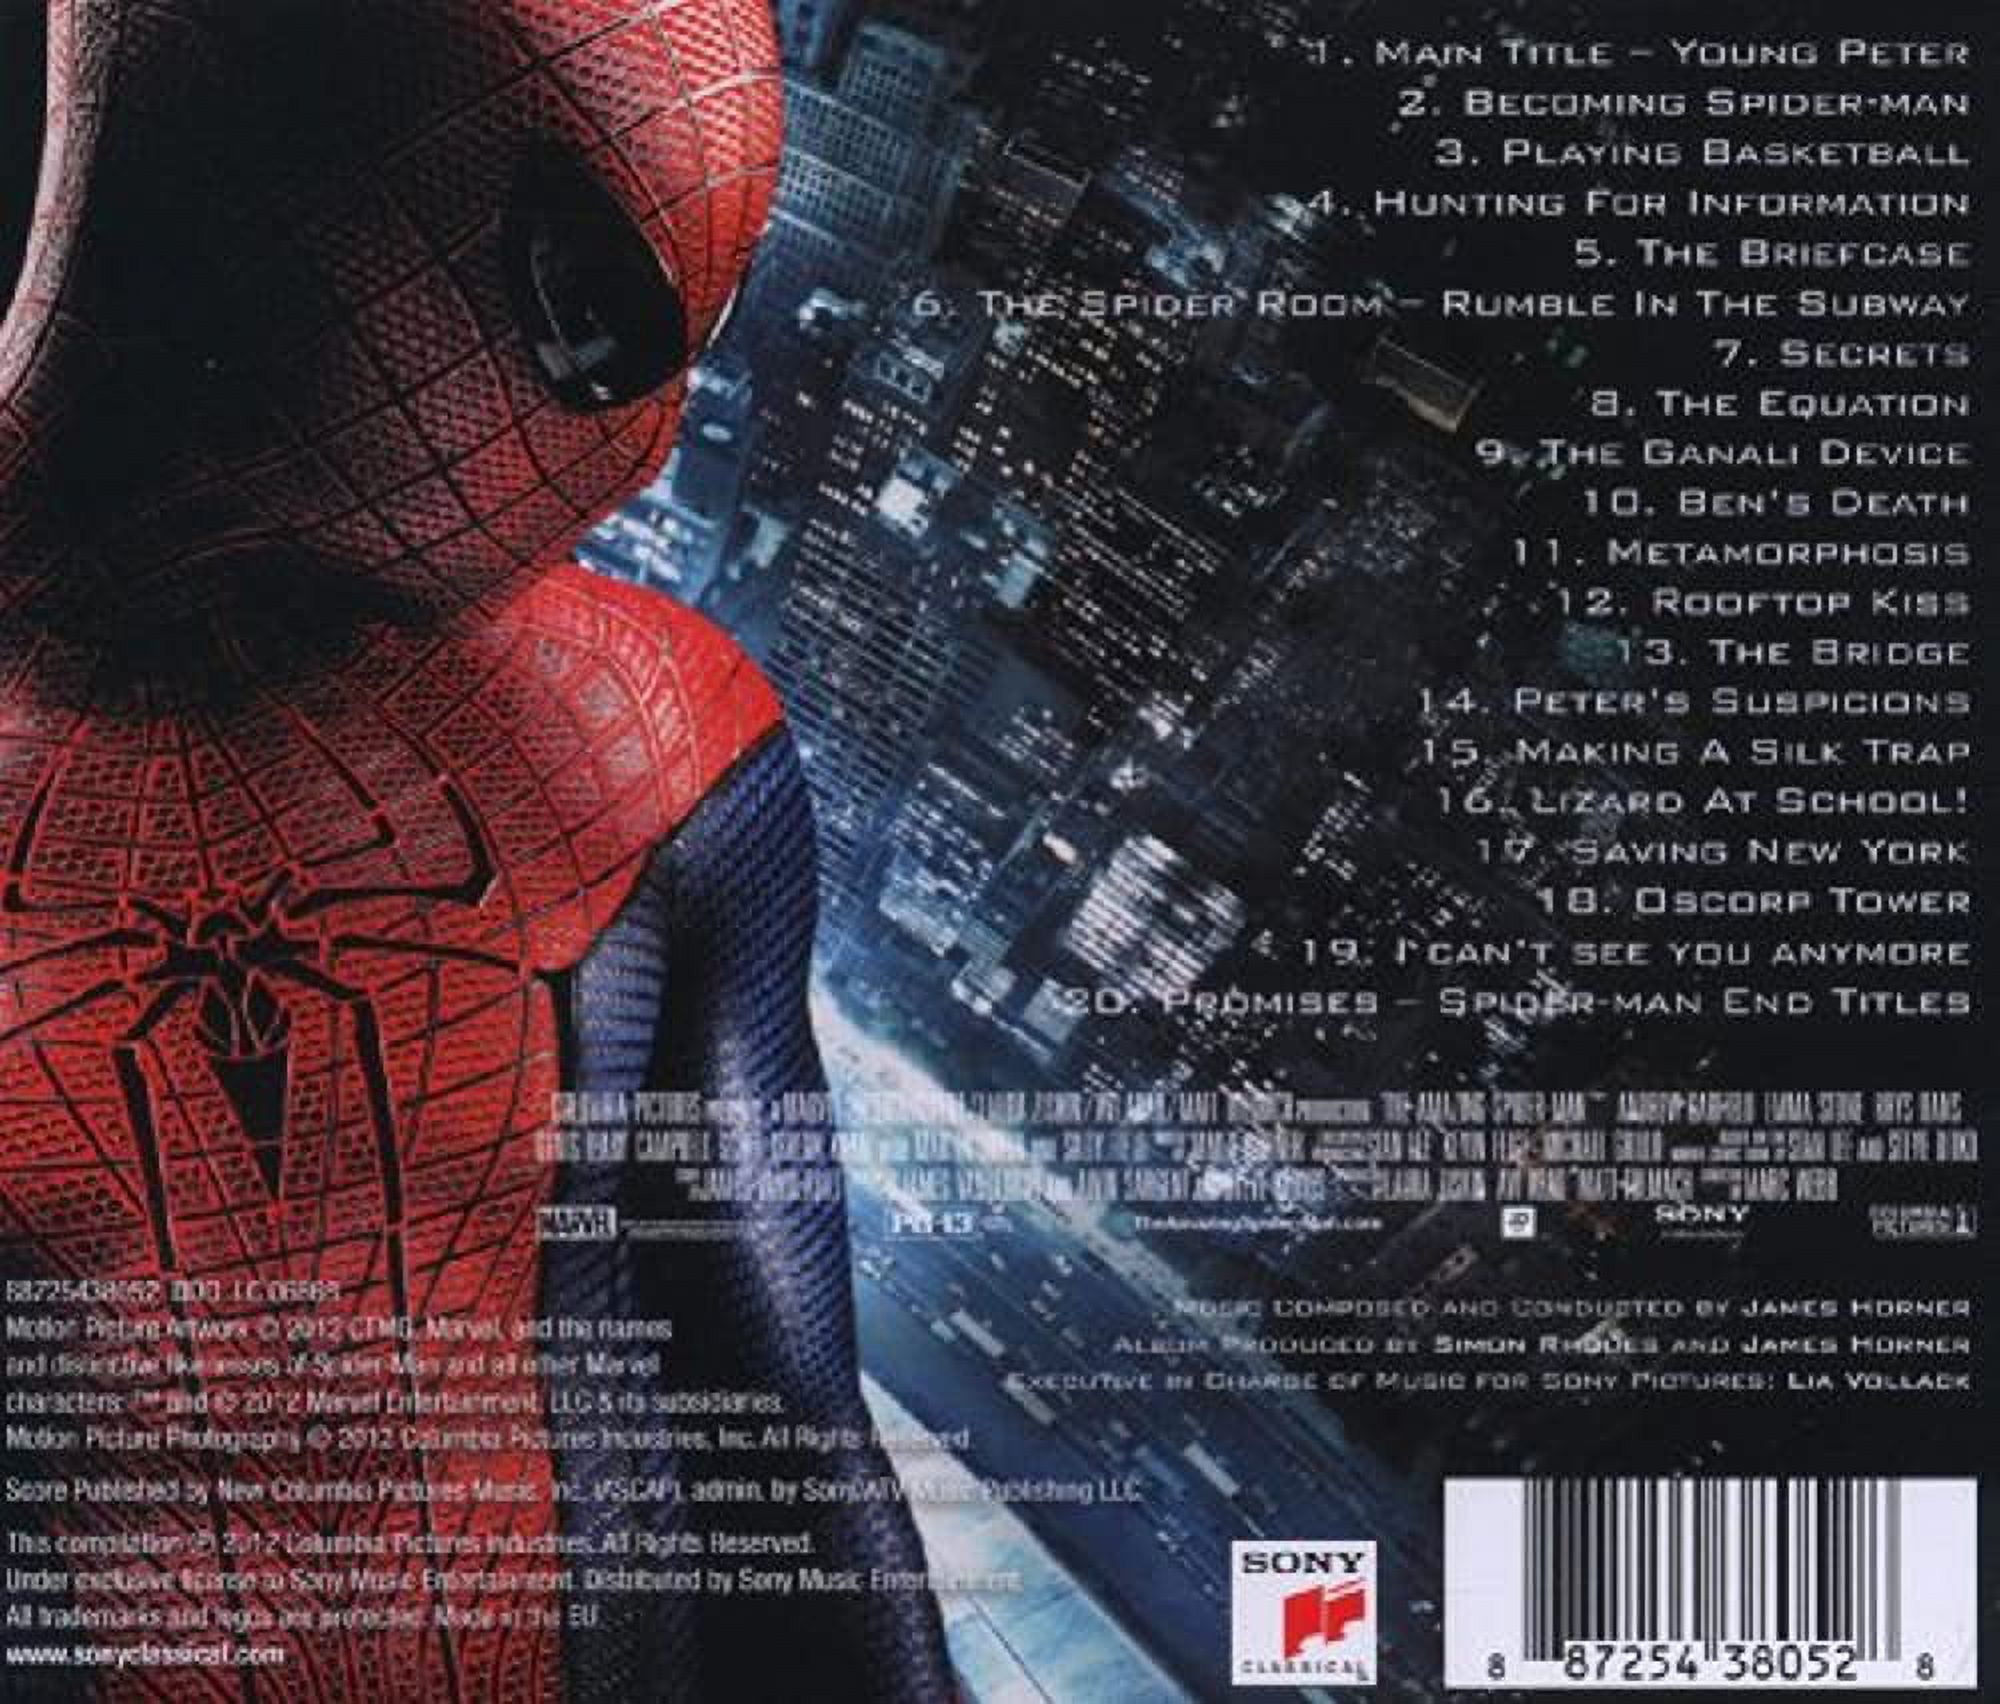 The Amazing Spider-Man by Karmin Soundtrack Parody Broken Hearted Spiderman  - song and lyrics by Screen Team